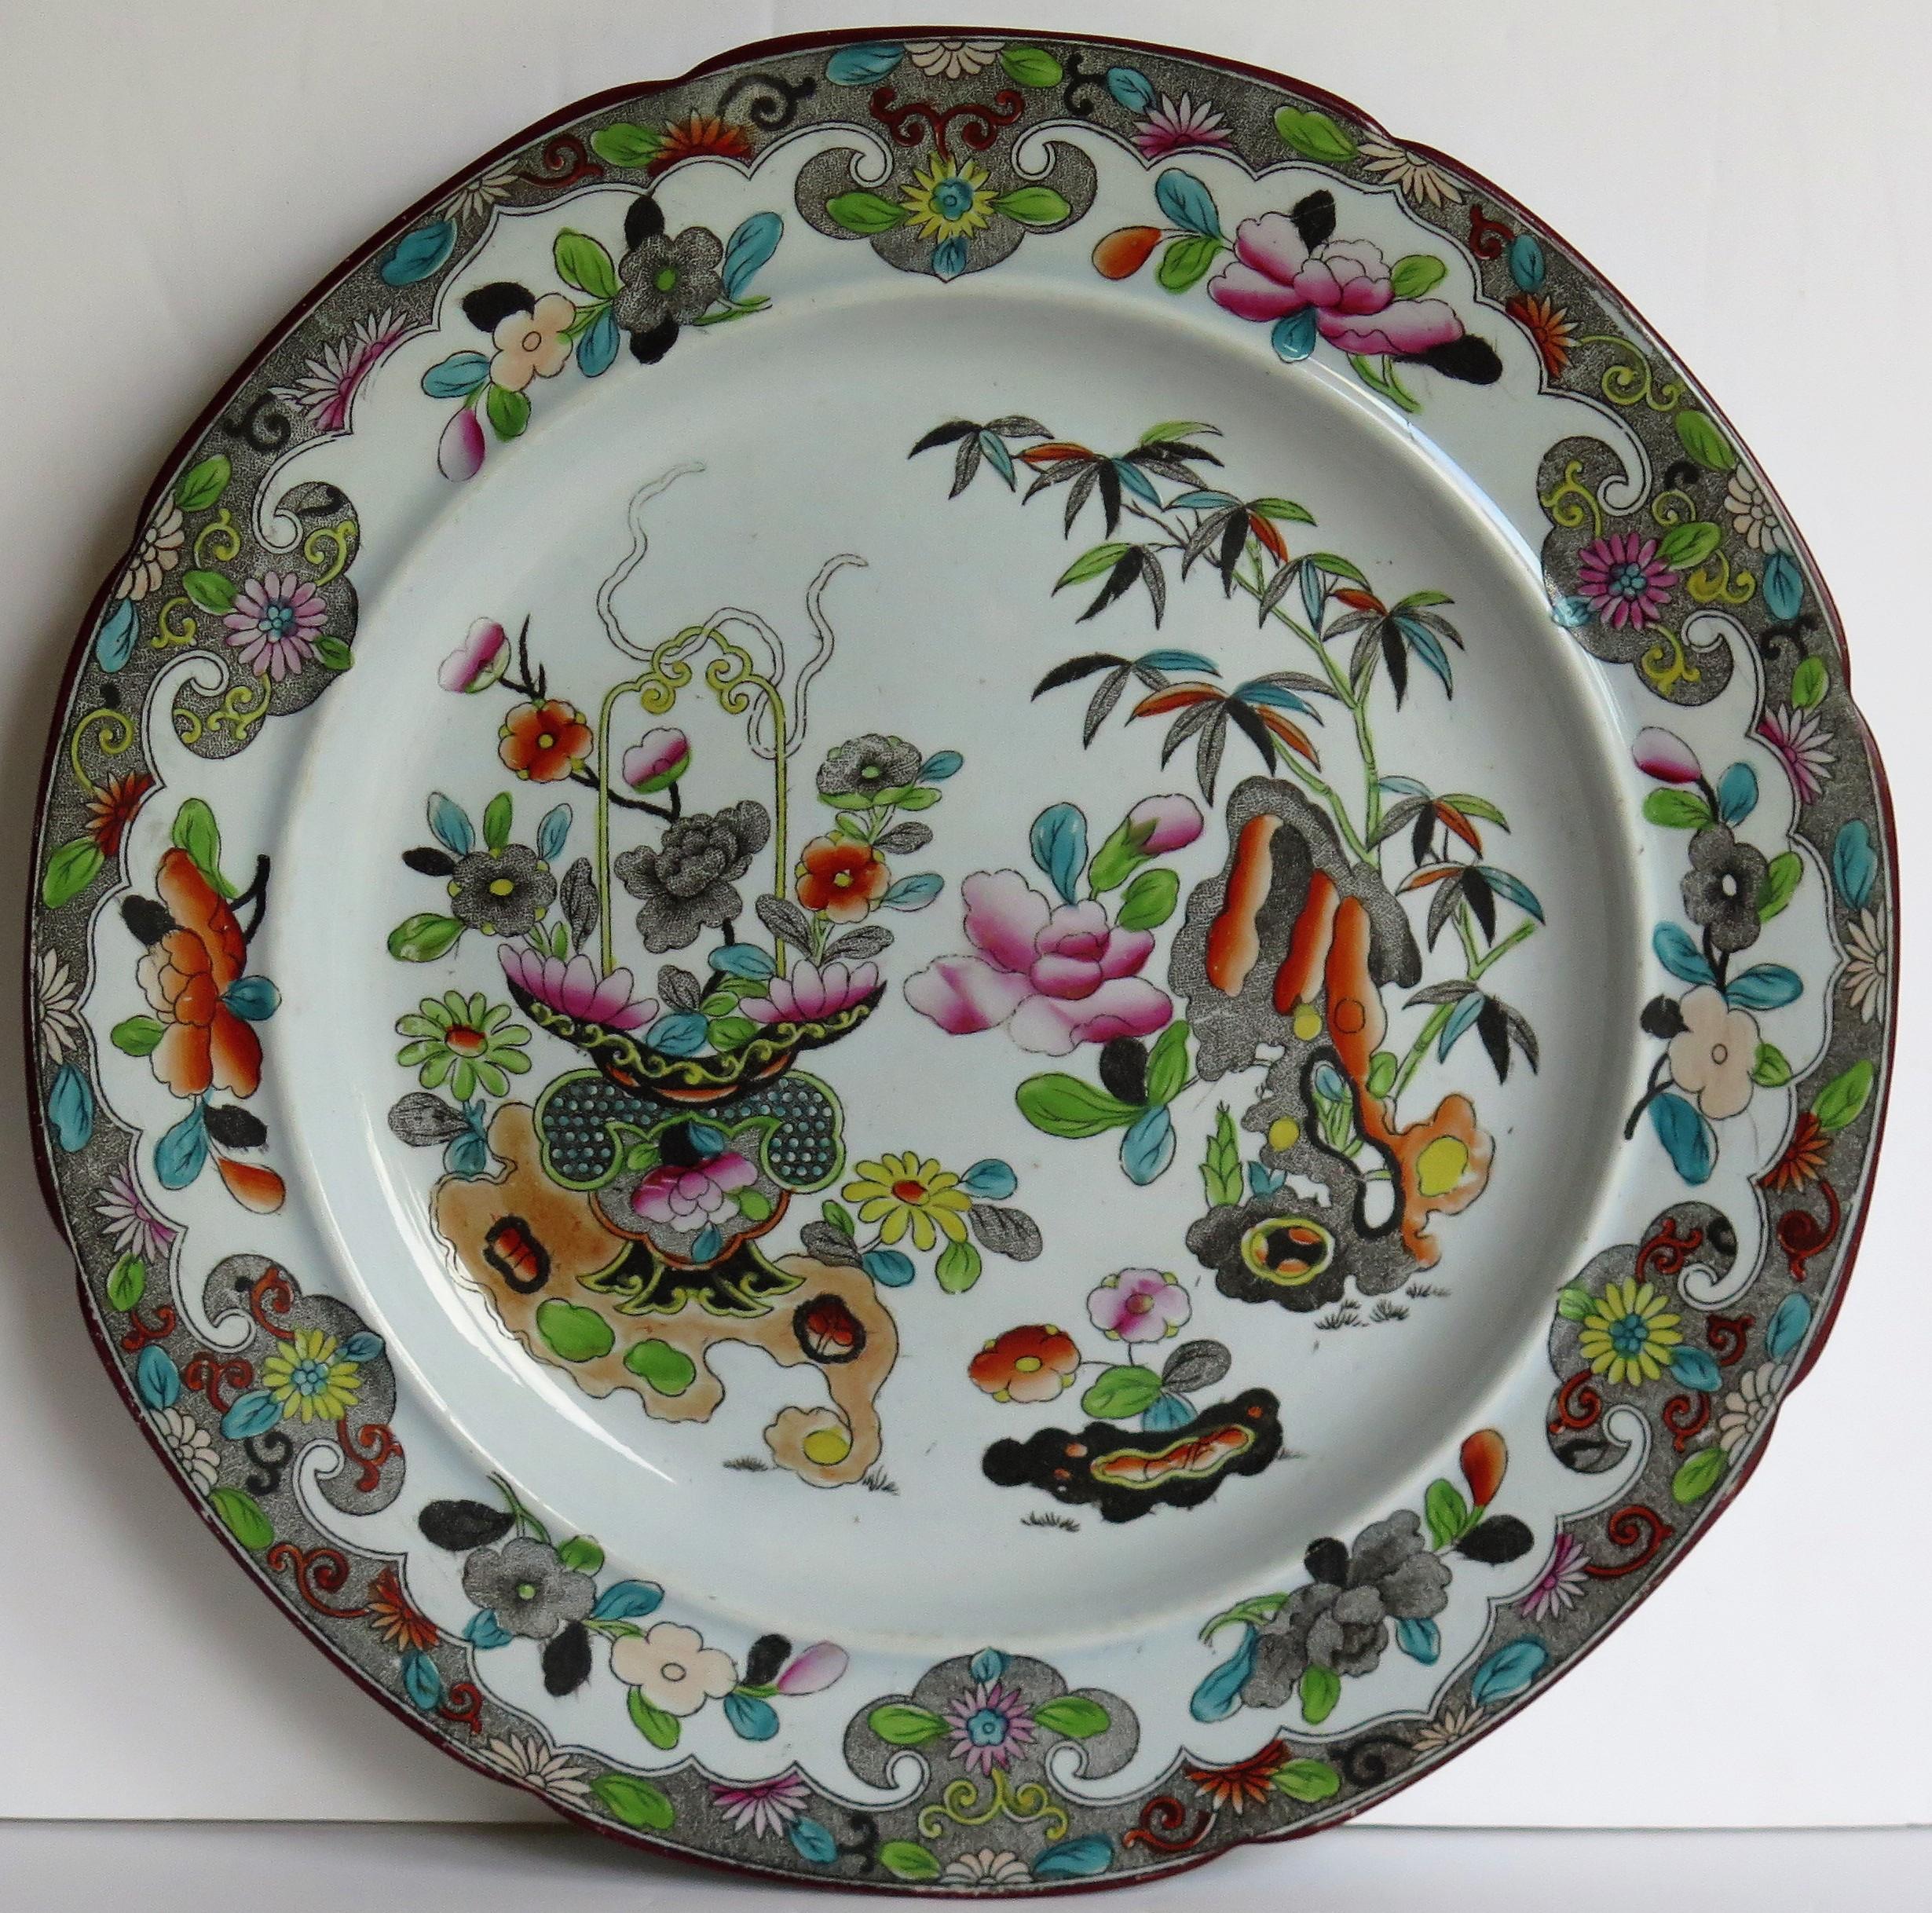 Chinoiserie Stephen Folch Dinner Plate in Bamboo and Basket Pattern Hand Painted, circa 1825